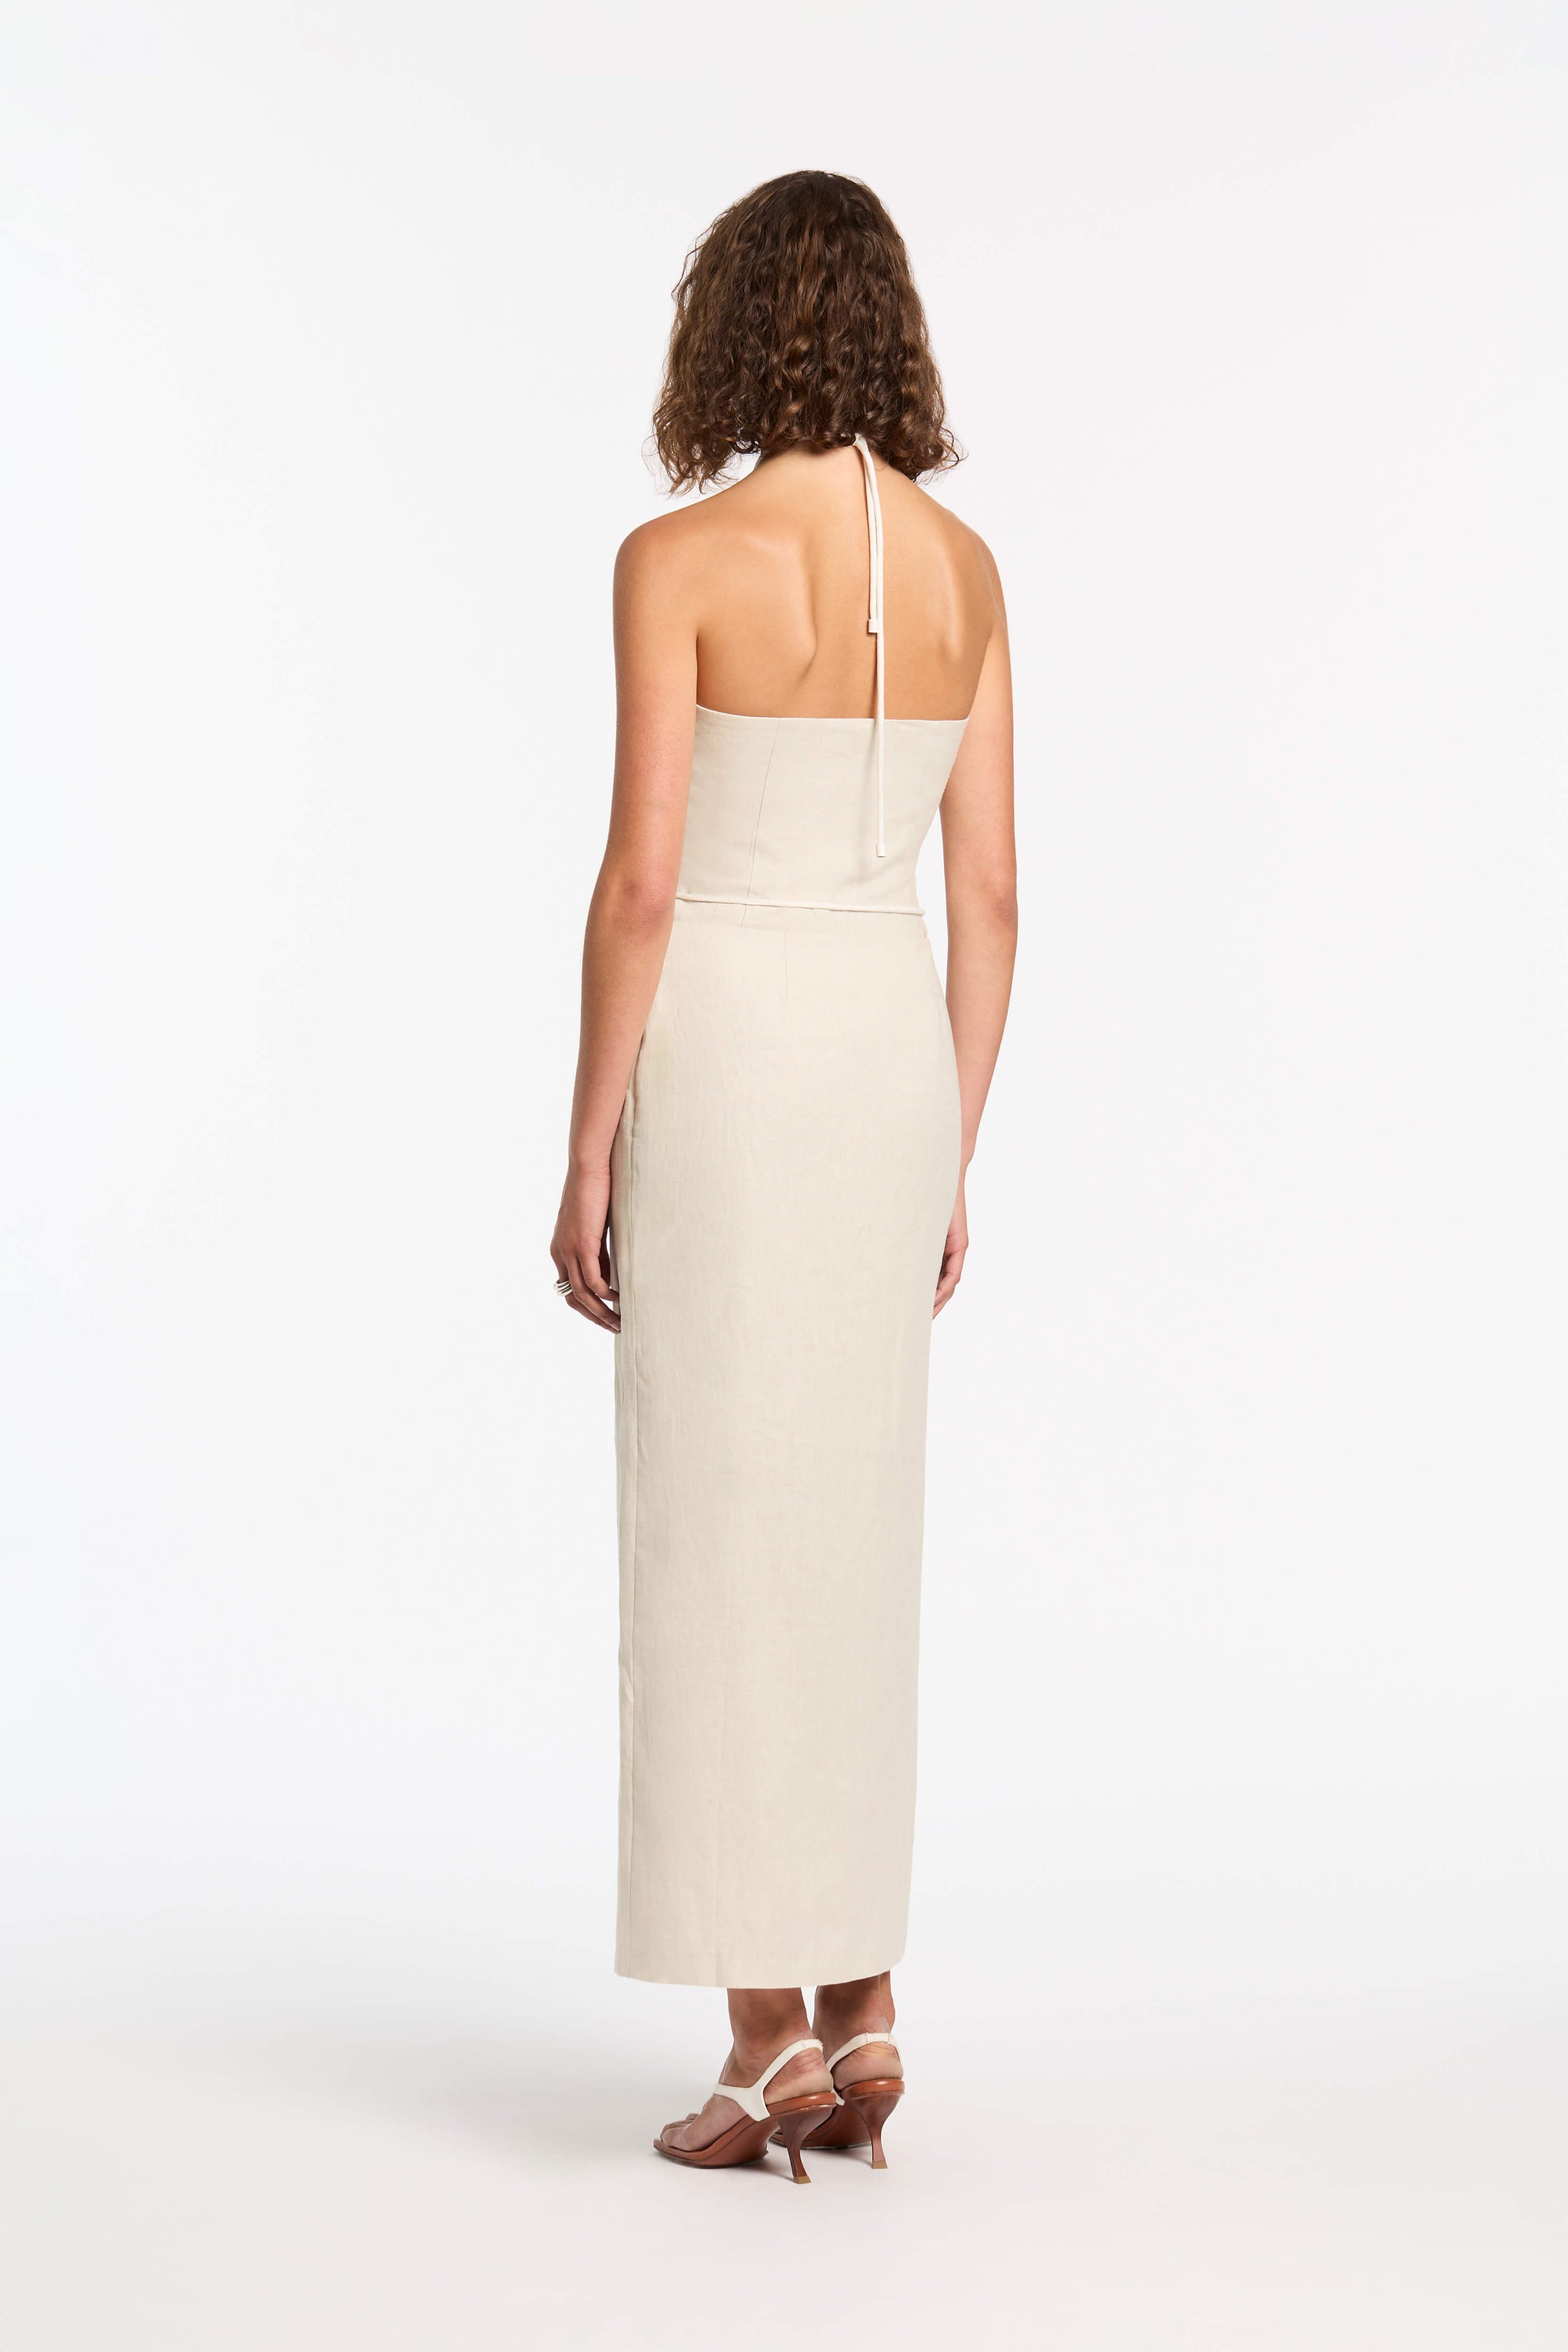 SIR Dorsay Corded Midi Skirt in Ecru available at TNT The New Trend Australia.